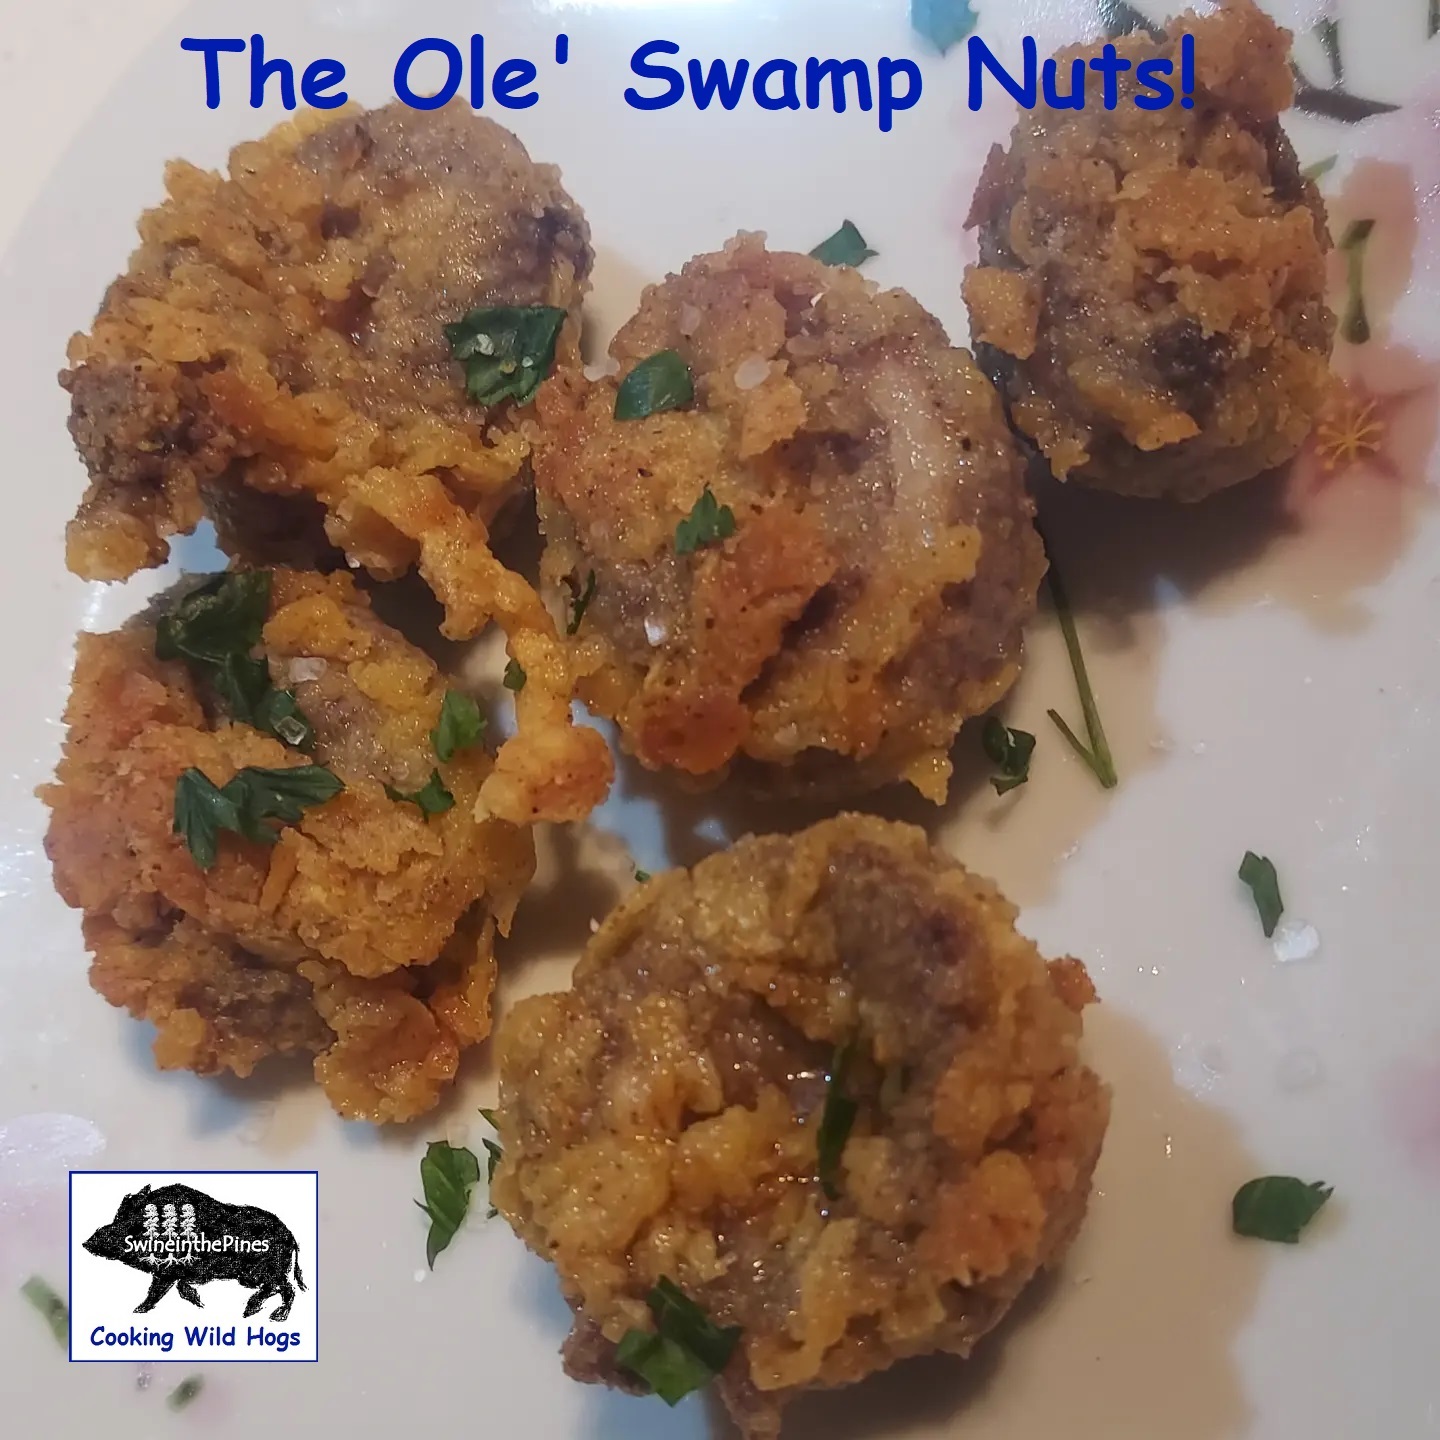 The Ole' Swamp Nuts